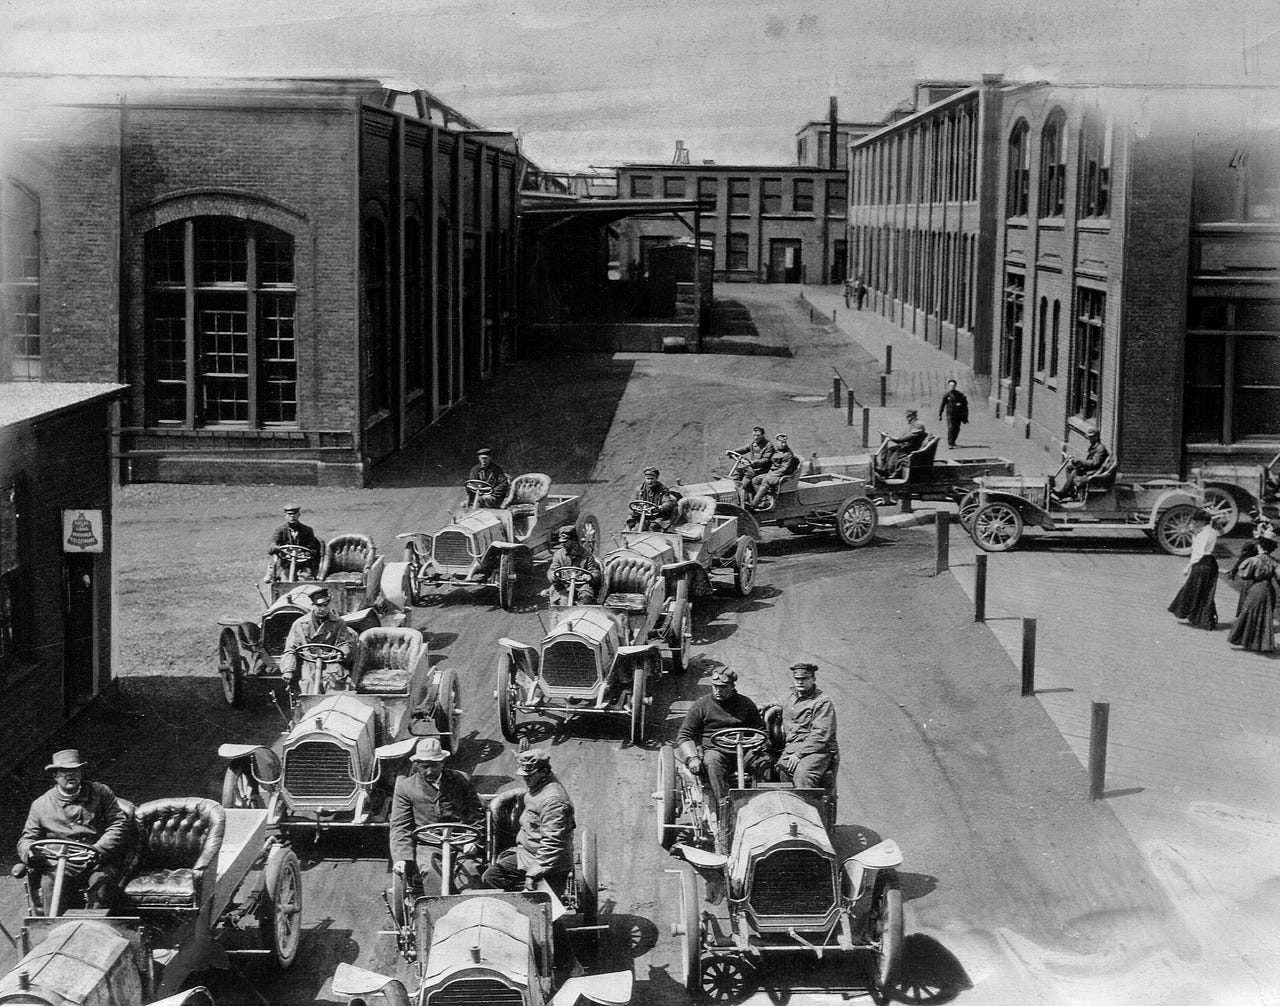 Packard cars go for a road test inside the grounds of the vast Packard plant on East Grand Boulevard in Detroit in 1905. The plant was built in 1903.